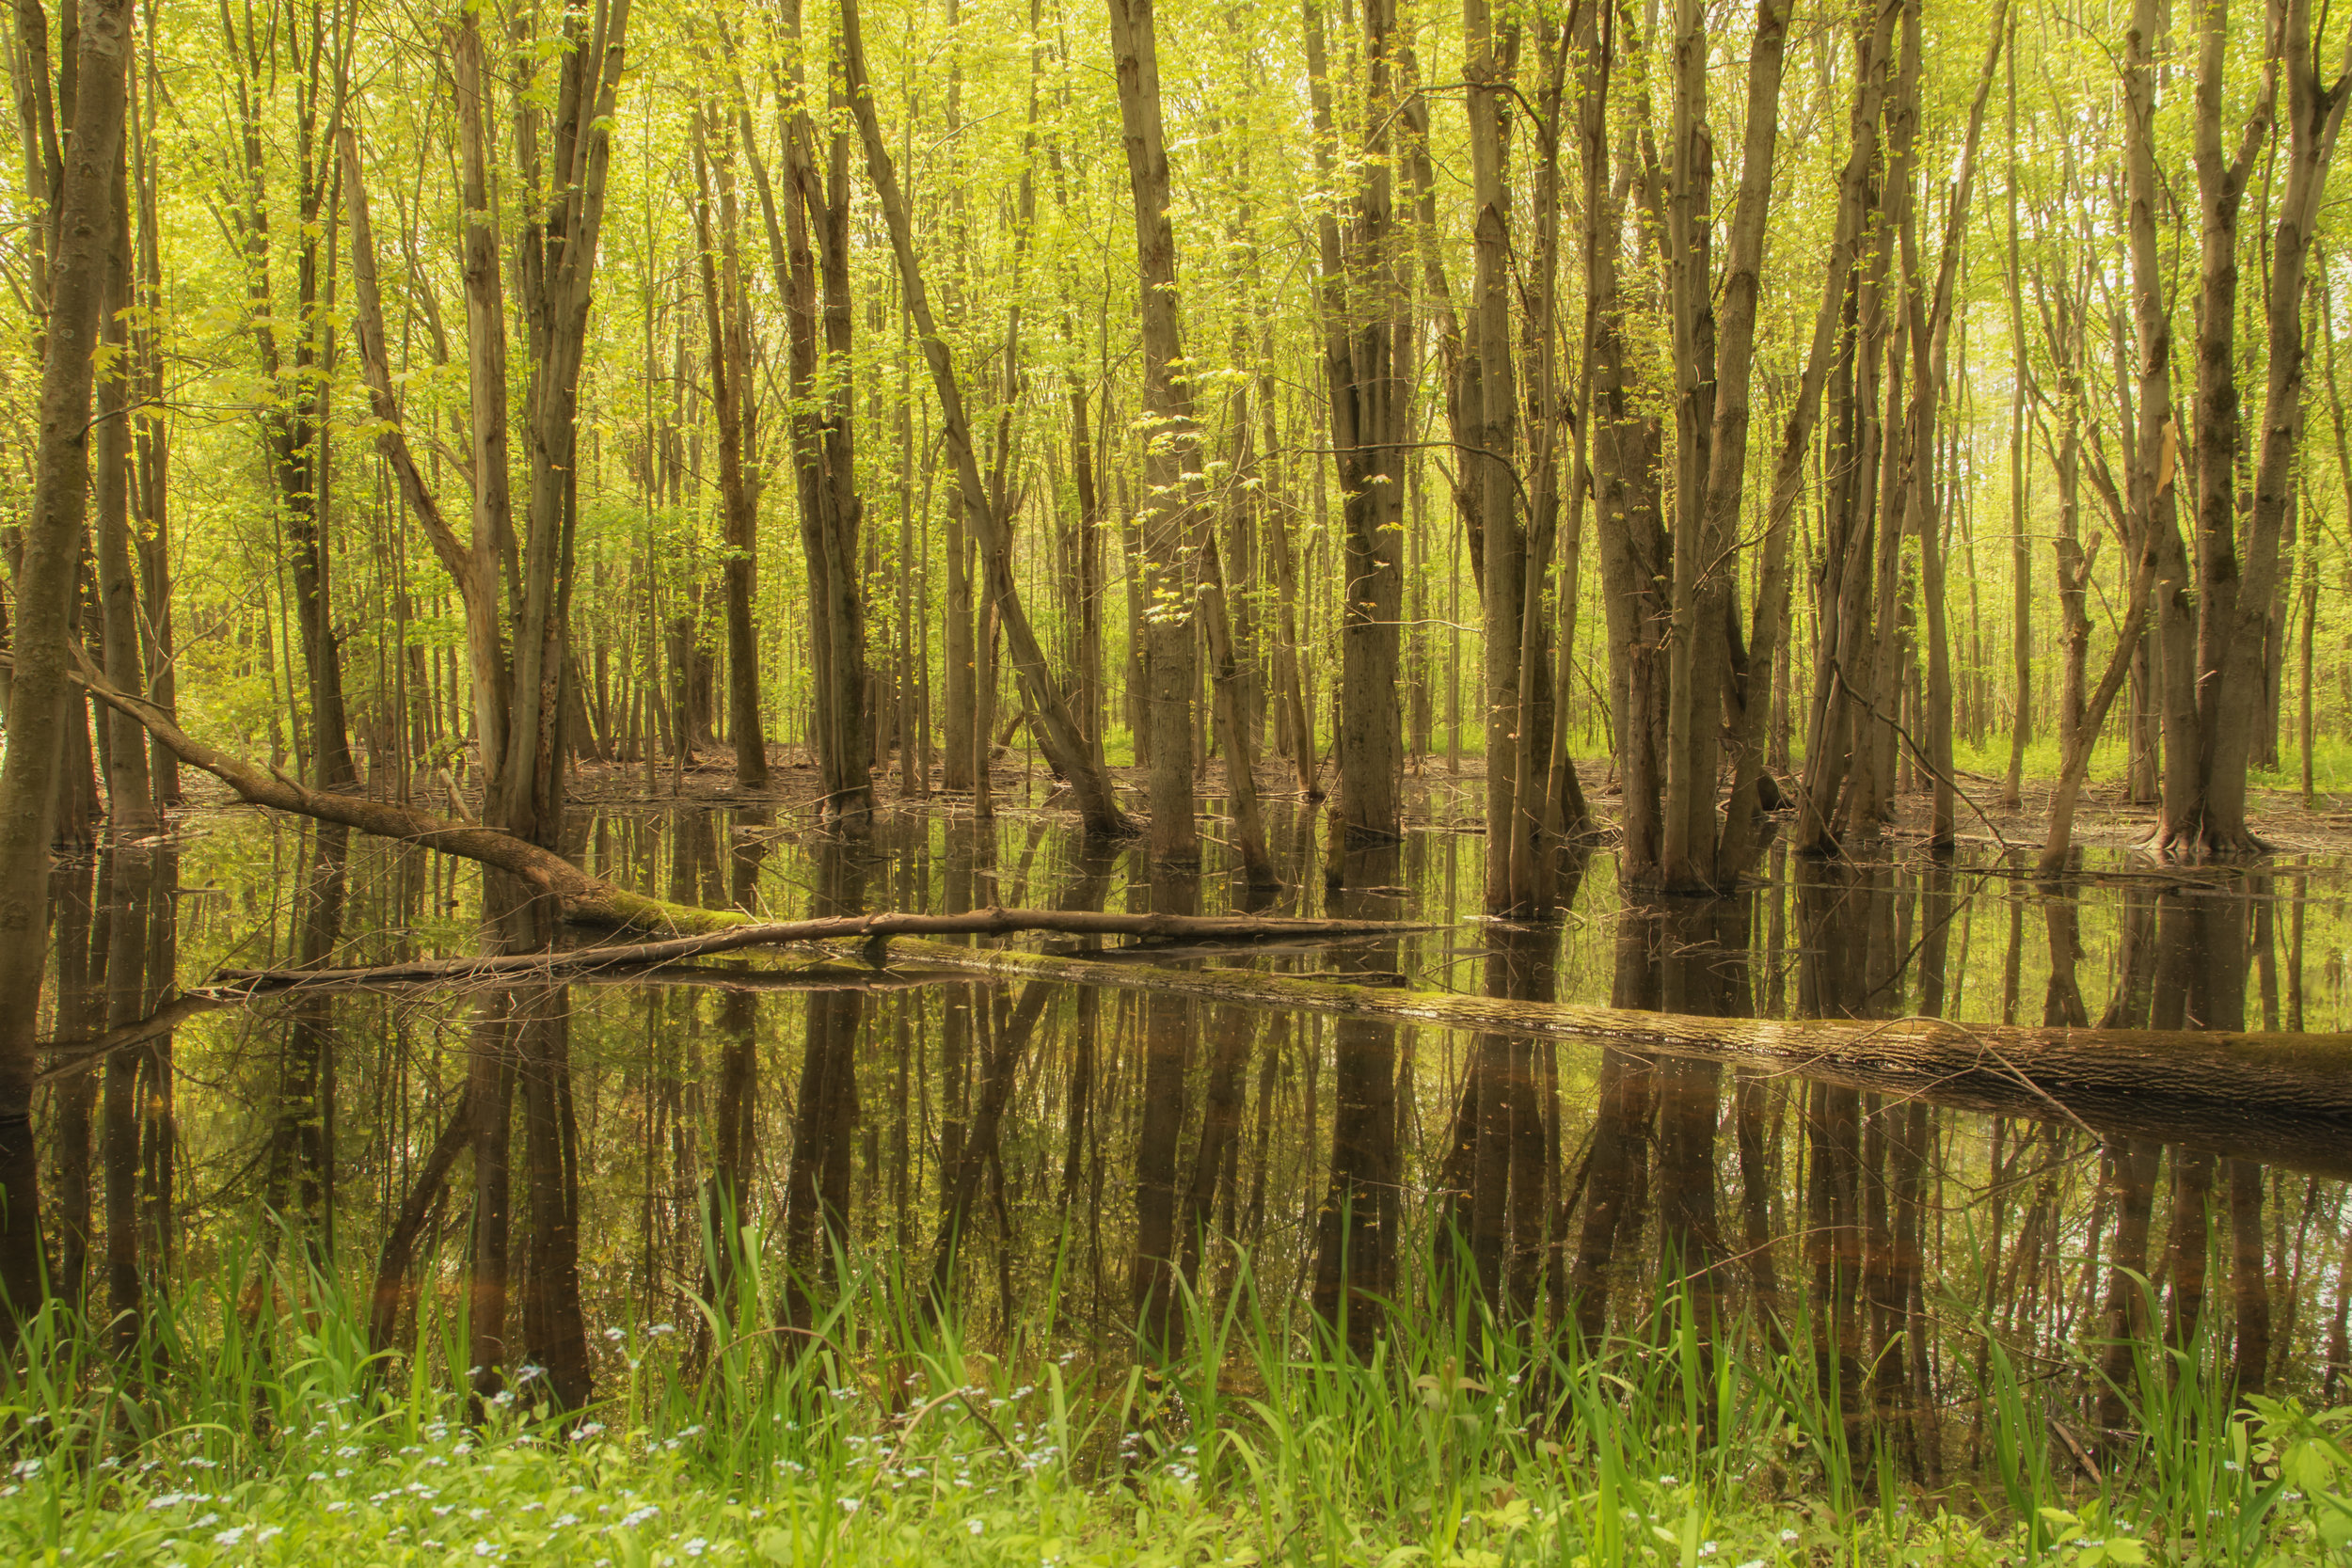 Swamp Reflections